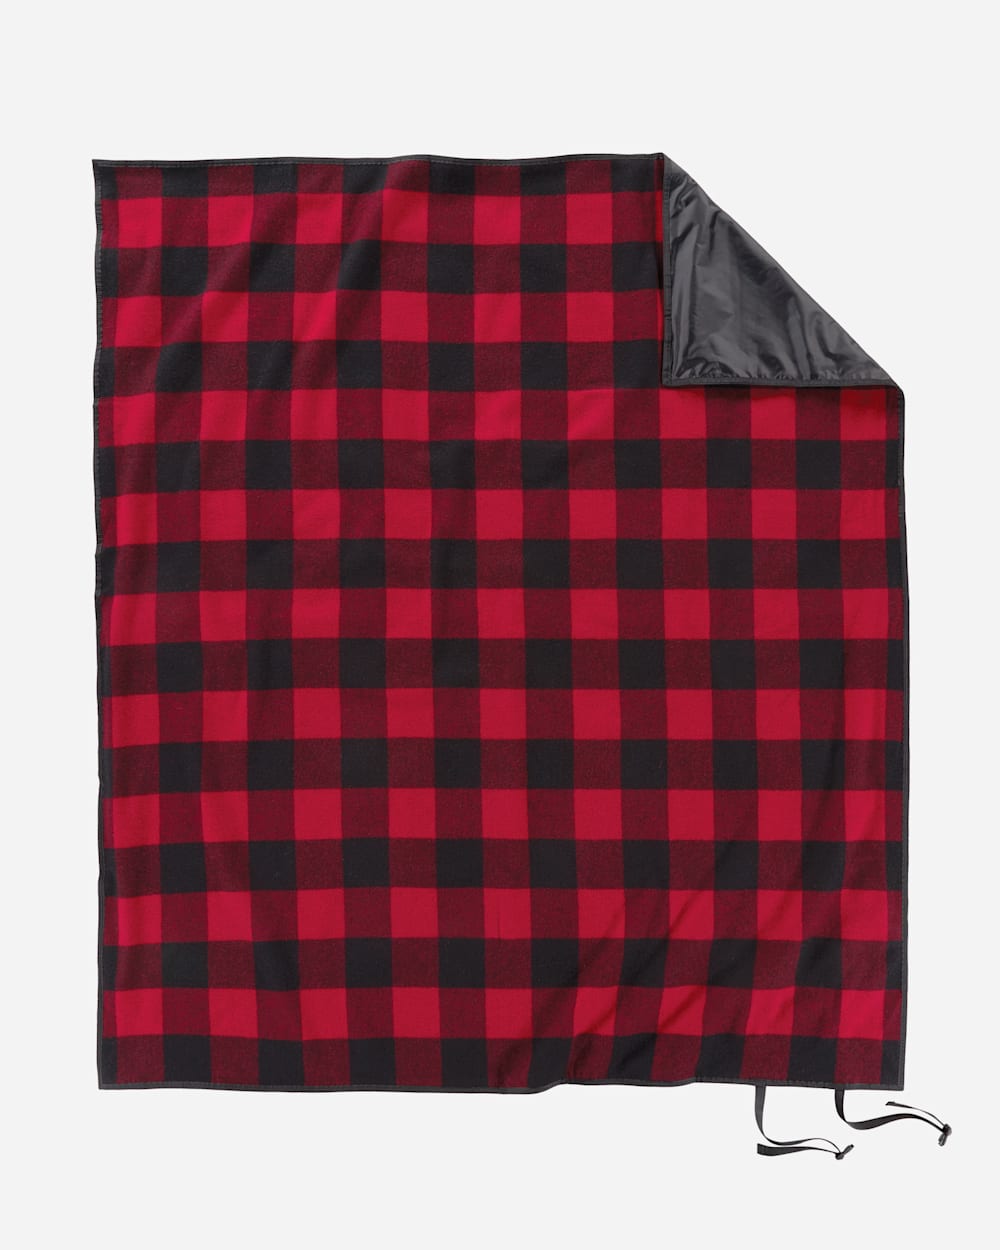 ALTERNATE VIEW OF ROLL-UP BLANKET IN ROB ROY TARTAN image number 2